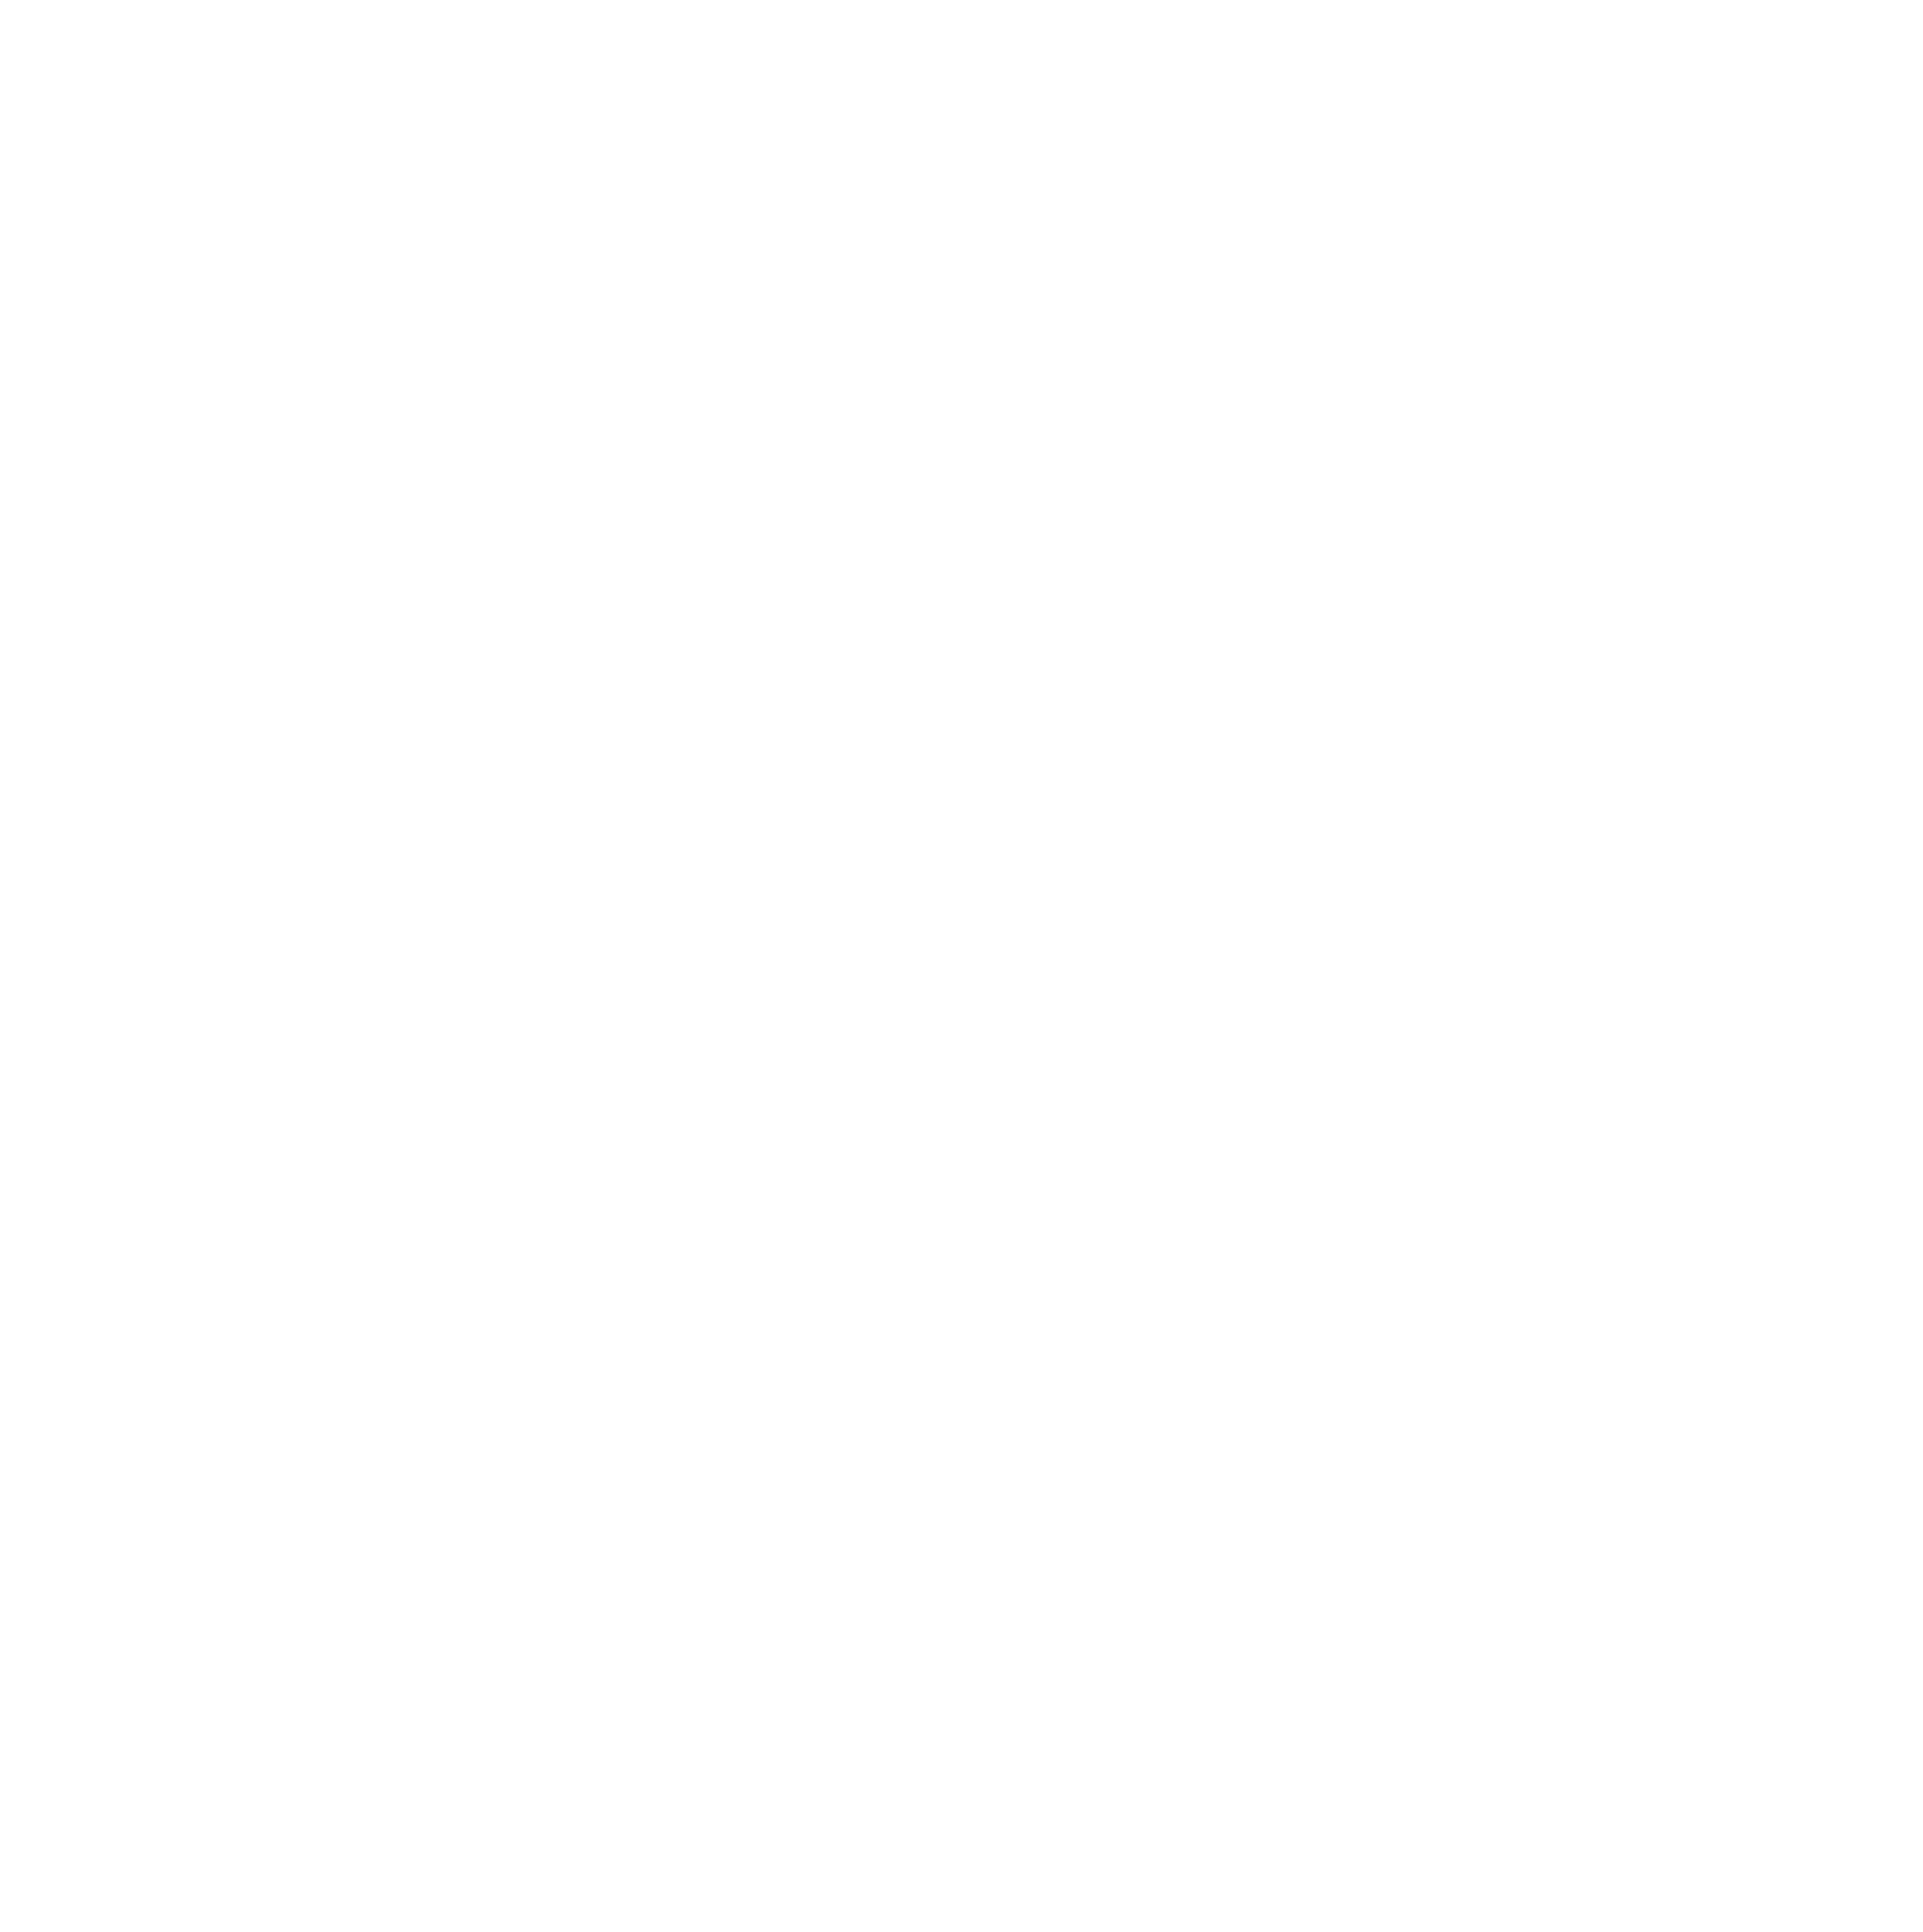 Mama Hazel’s Southern-Made Pecan Pies logo in white